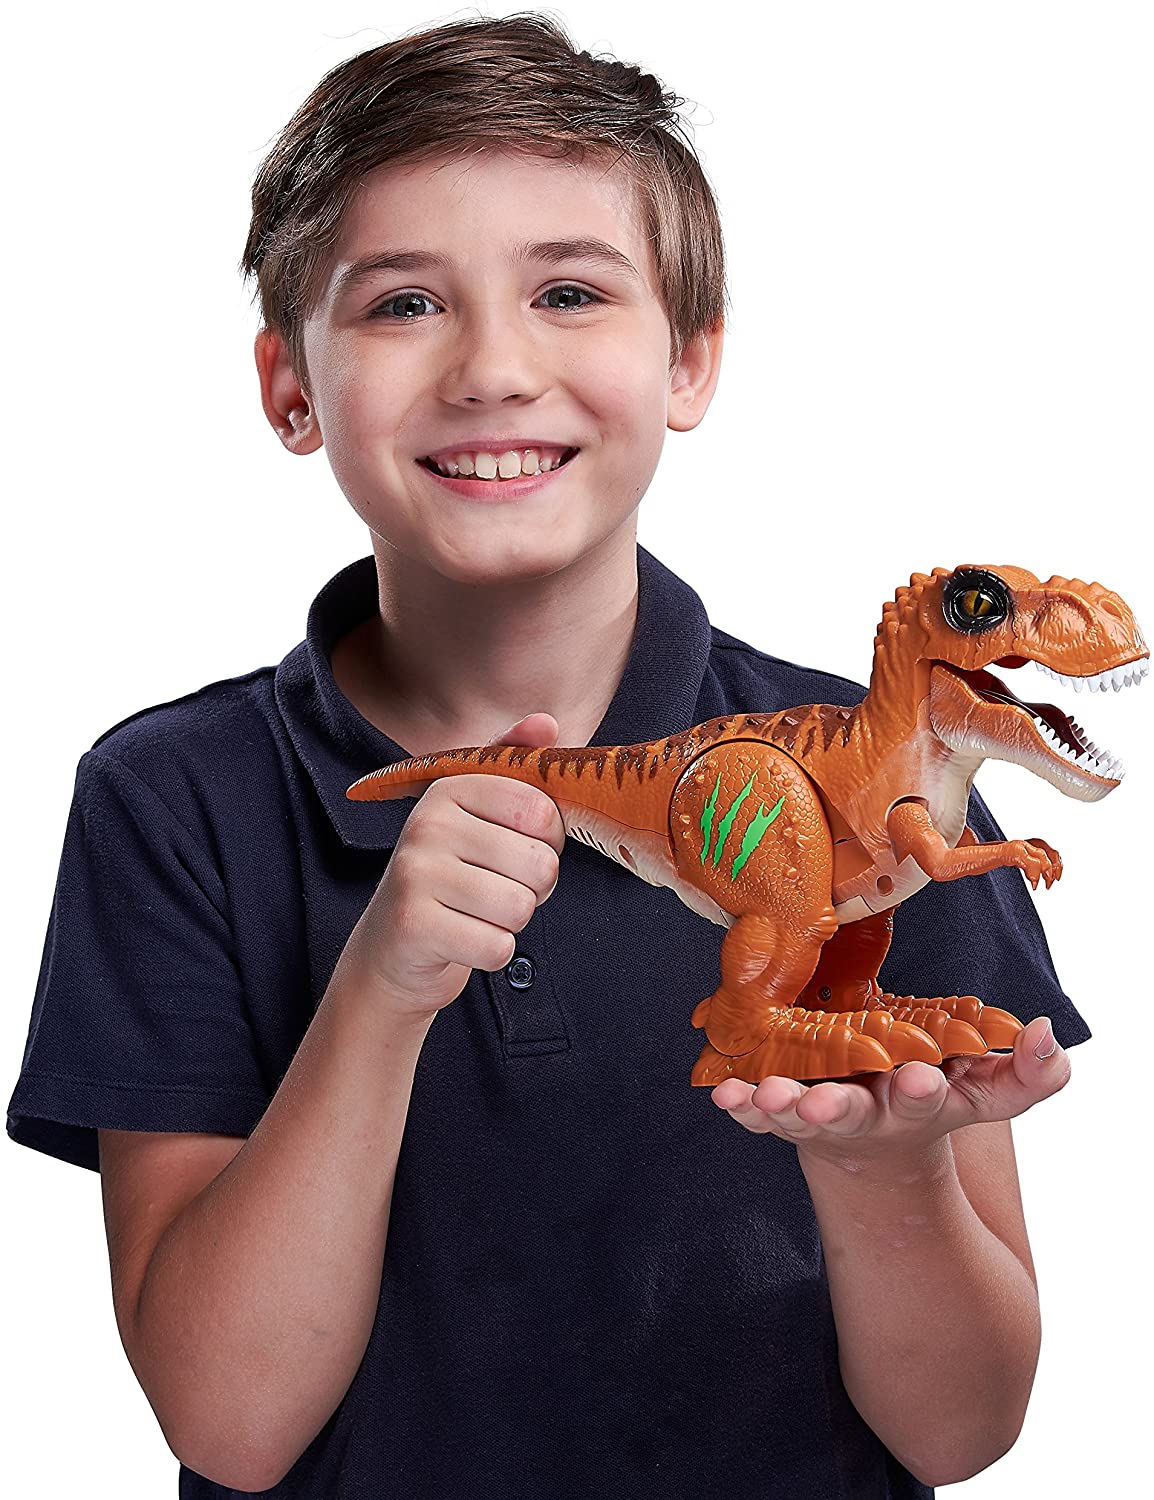 Robo Alive Attacking T-Rex Dinosaur Battery-Powered Robotic Toy by ZURU (Color may vary) - image 5 of 12